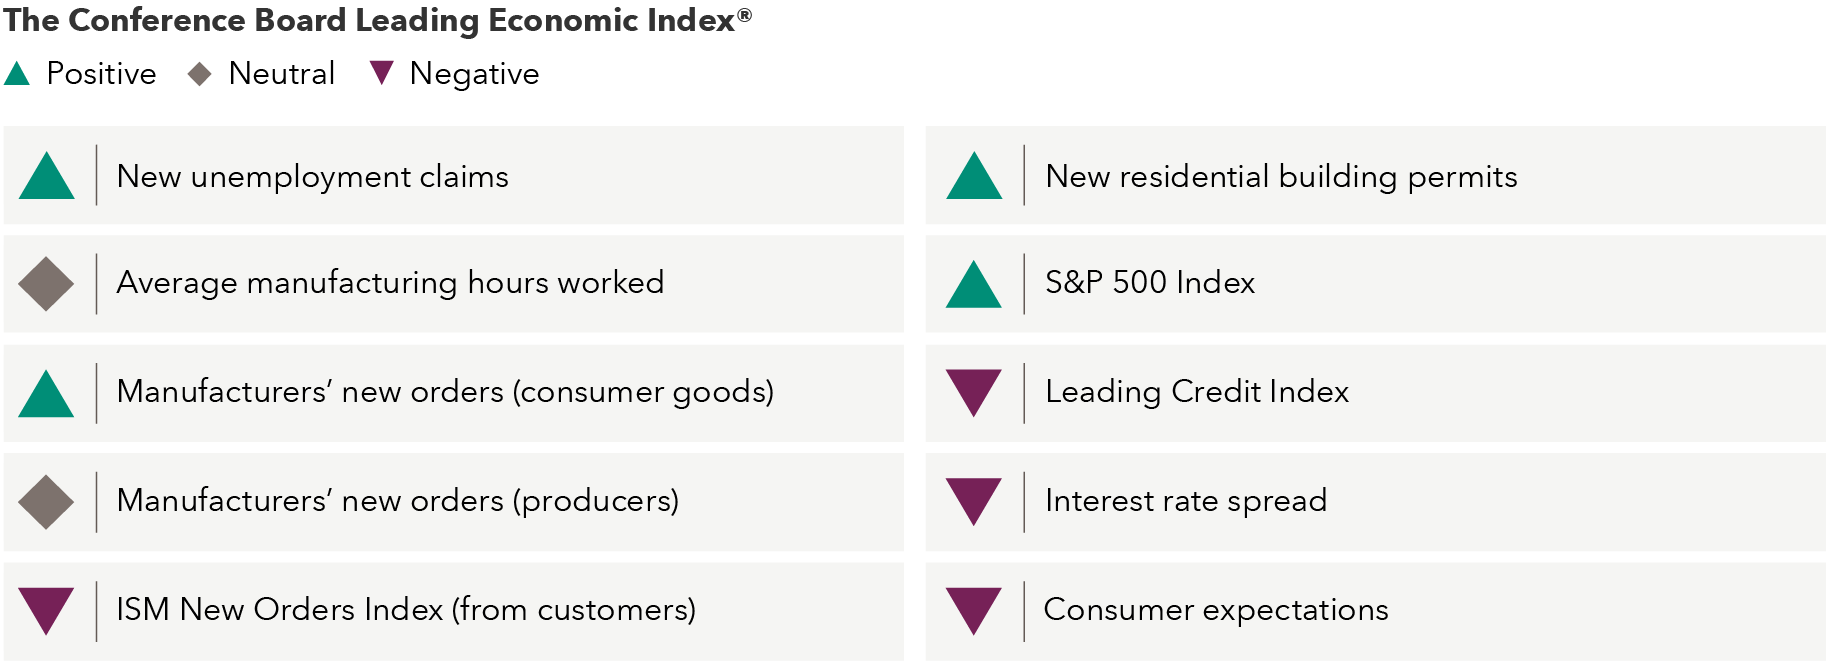 The image shows the Conference Board Leading Economic Index's 10 components and their expected positive, neutral or negative impact on U.S. economic growth. The components and their ratings are: New unemployment claims, positive; average manufacturing hours worked, neutral; manufacturers' new orders (consumer goods), positive; manufacturers' new orders (producers), neutral; I.S.M. New Orders Index (from customers), negative; new residential building permits, positive; S&P 500 Index, positive; Leading Credit Index, negative; interest rate spread, negative; consumer expectations, negative.